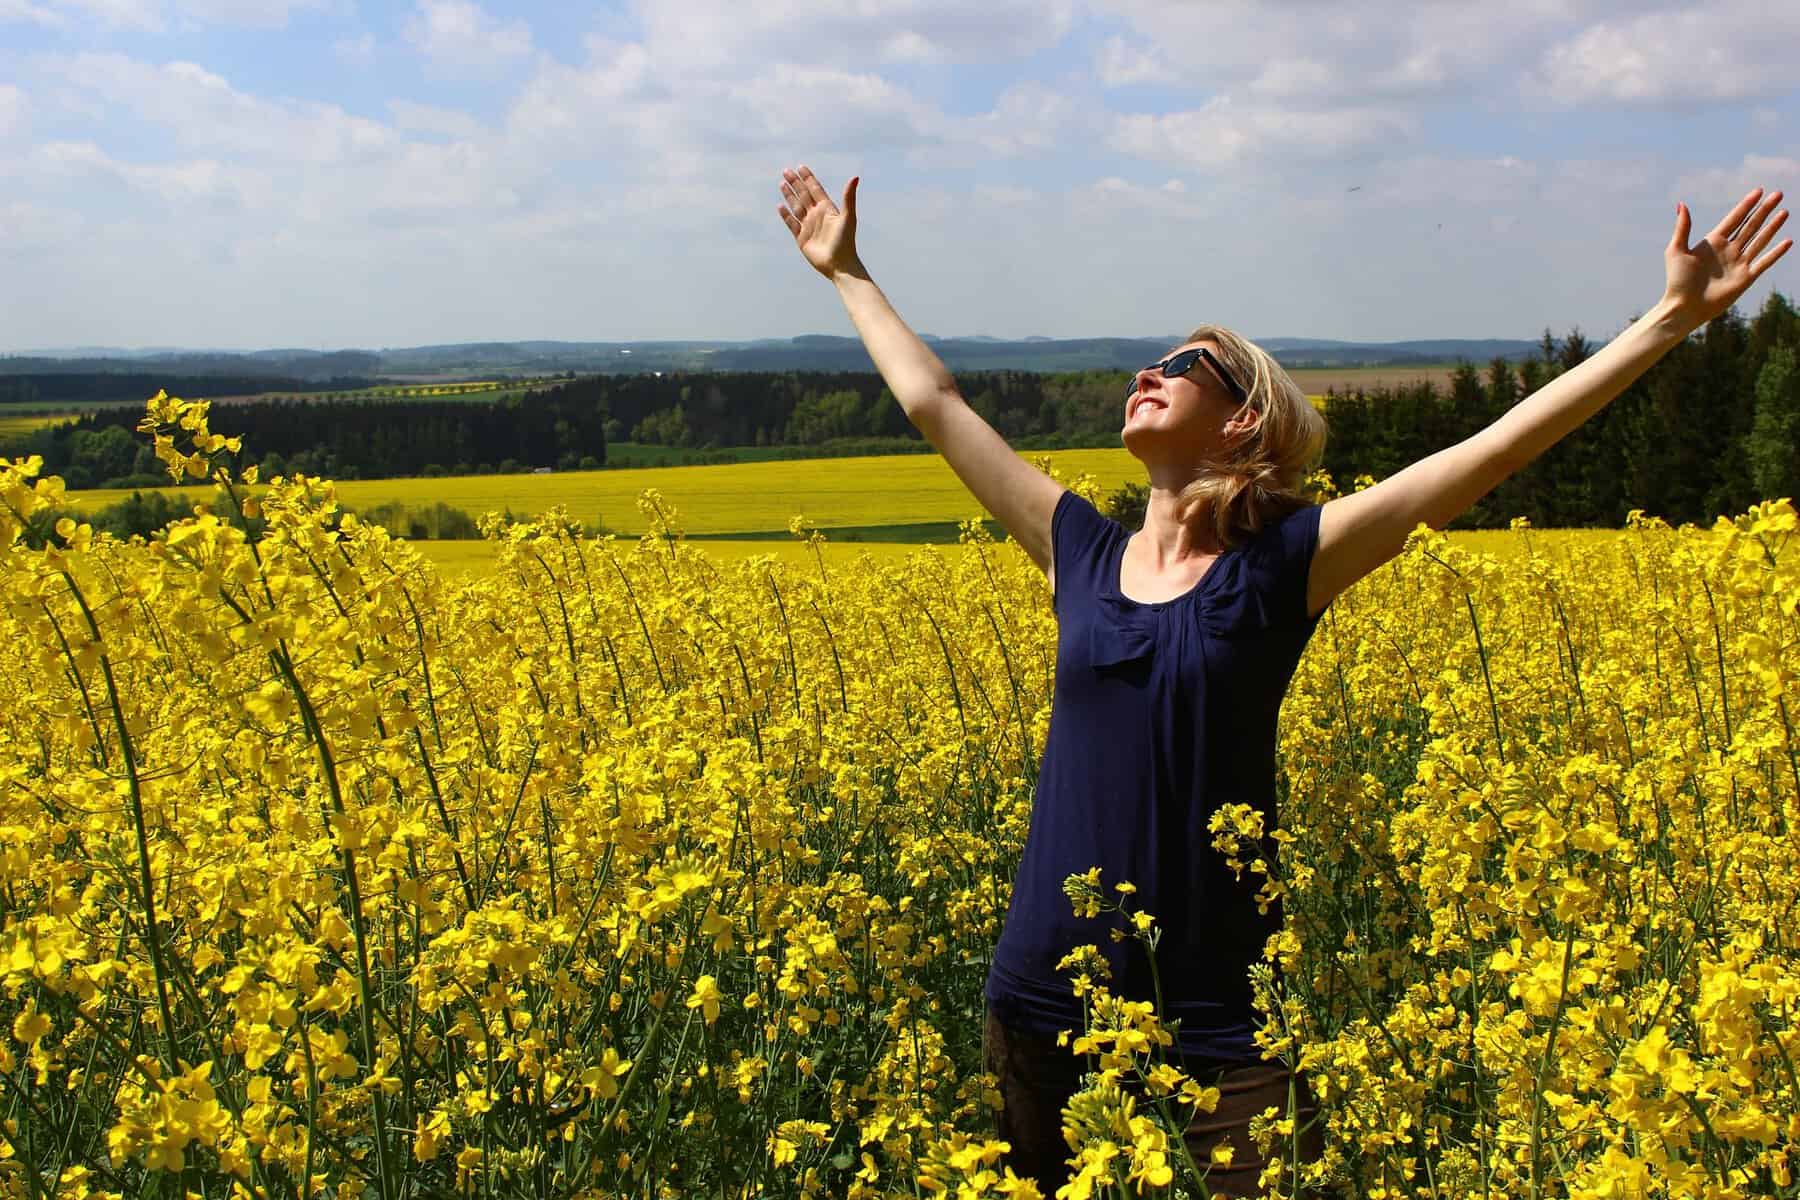 A woman stands in a field of yellow flowers with arms spread wide.